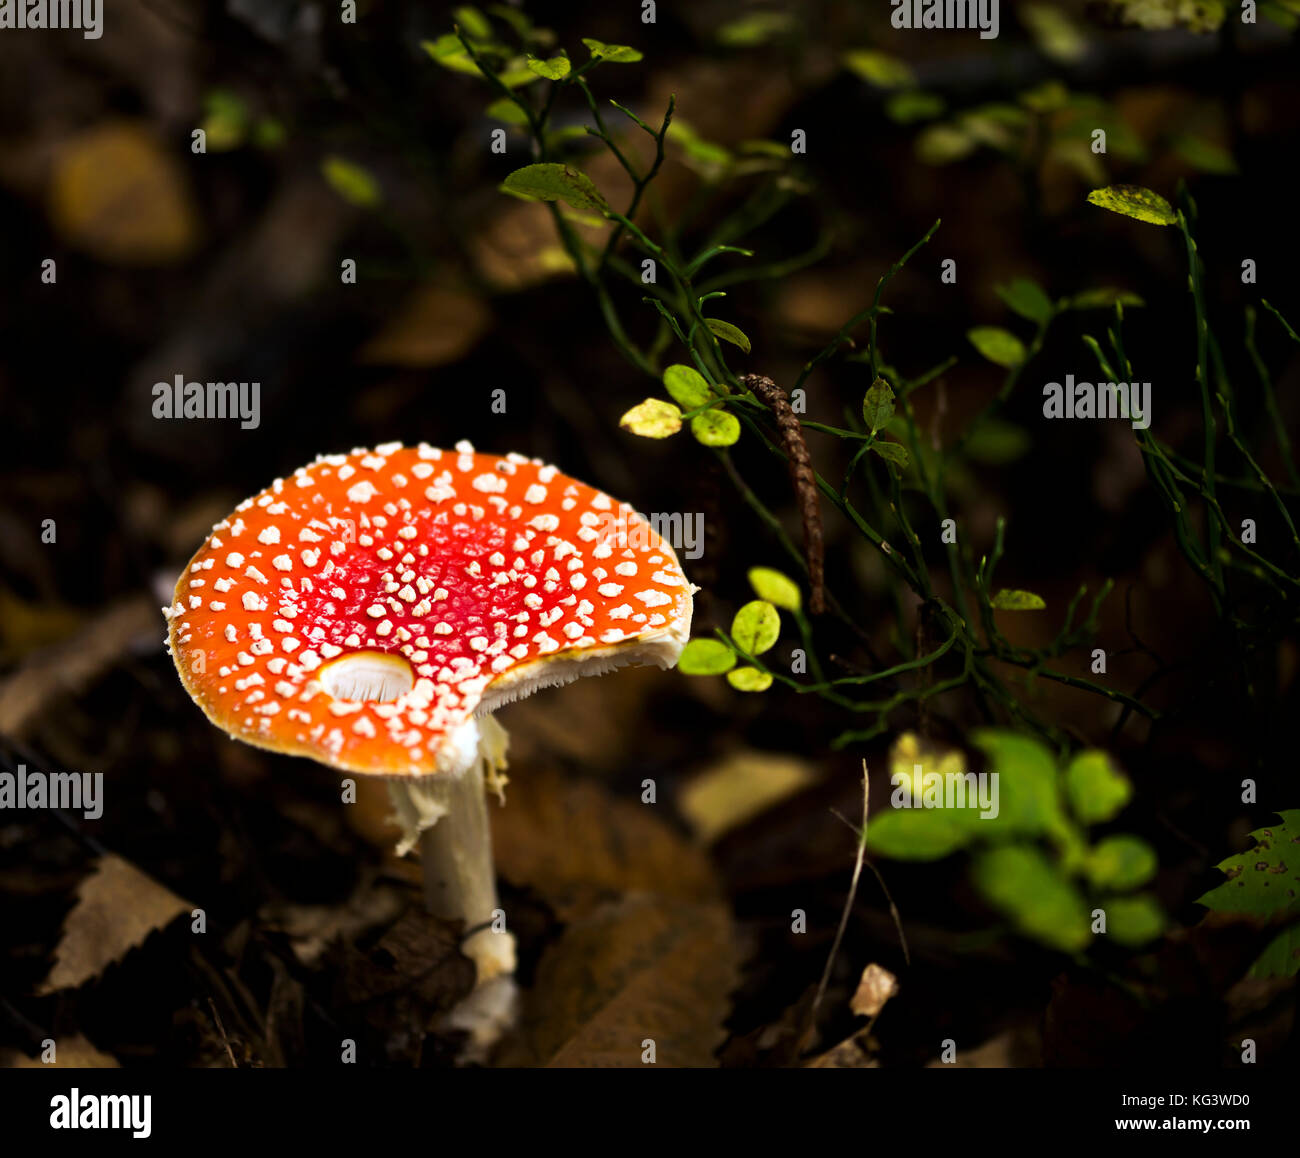 Amanita Muscaria mushroom growing on the forest grounds. Stock Photo